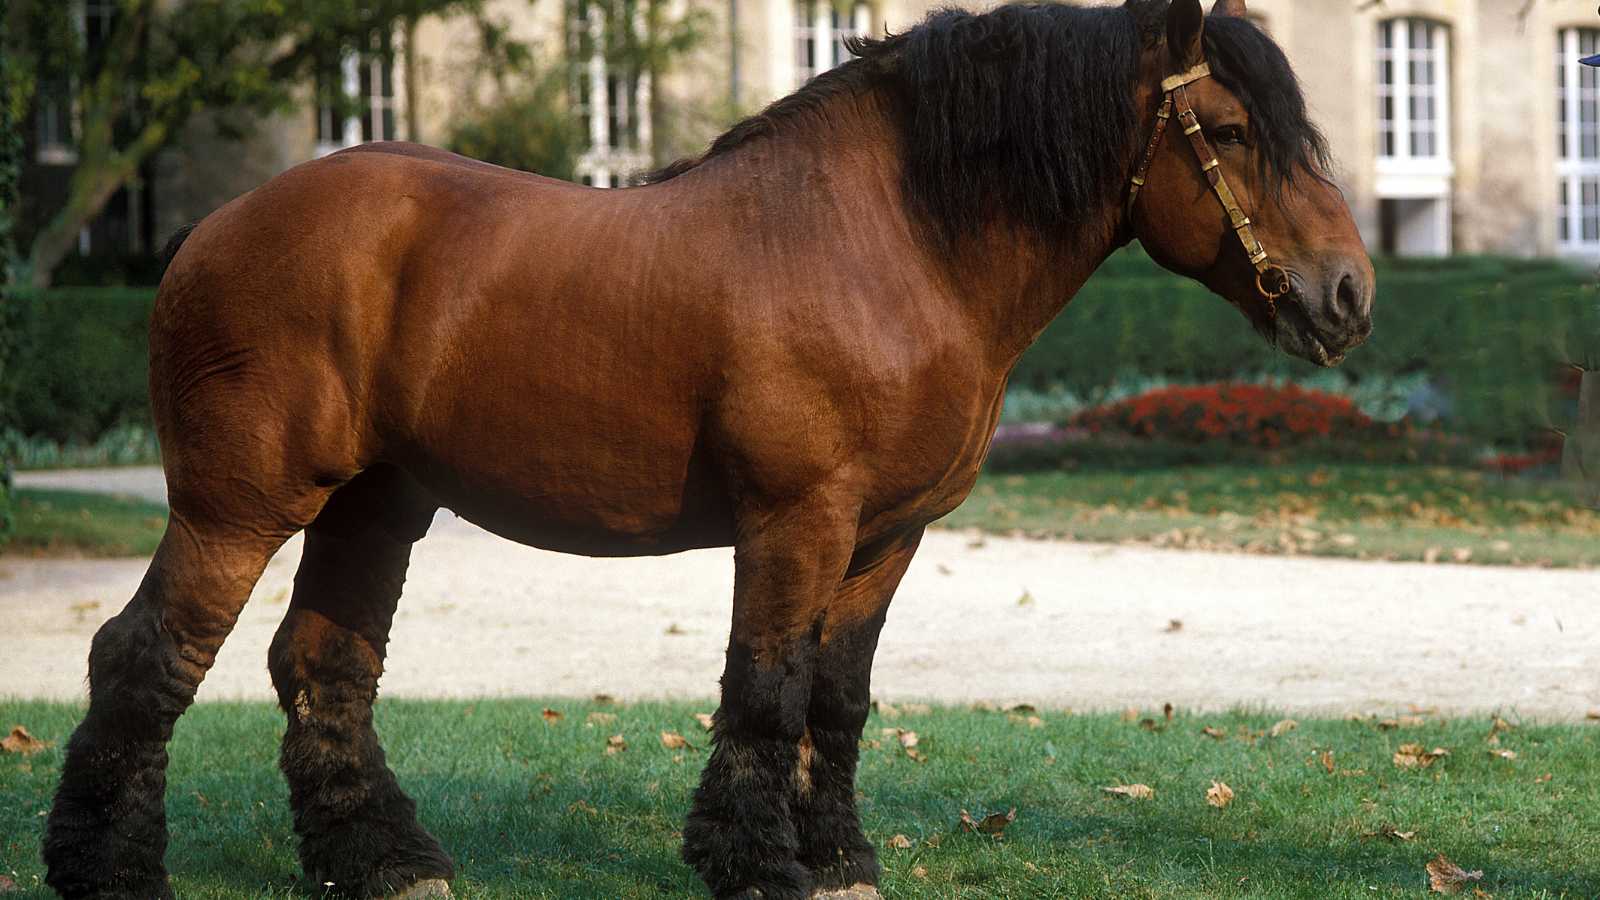 A large and powerful dark brown horse with a black mane stands in aa field in front of a house.